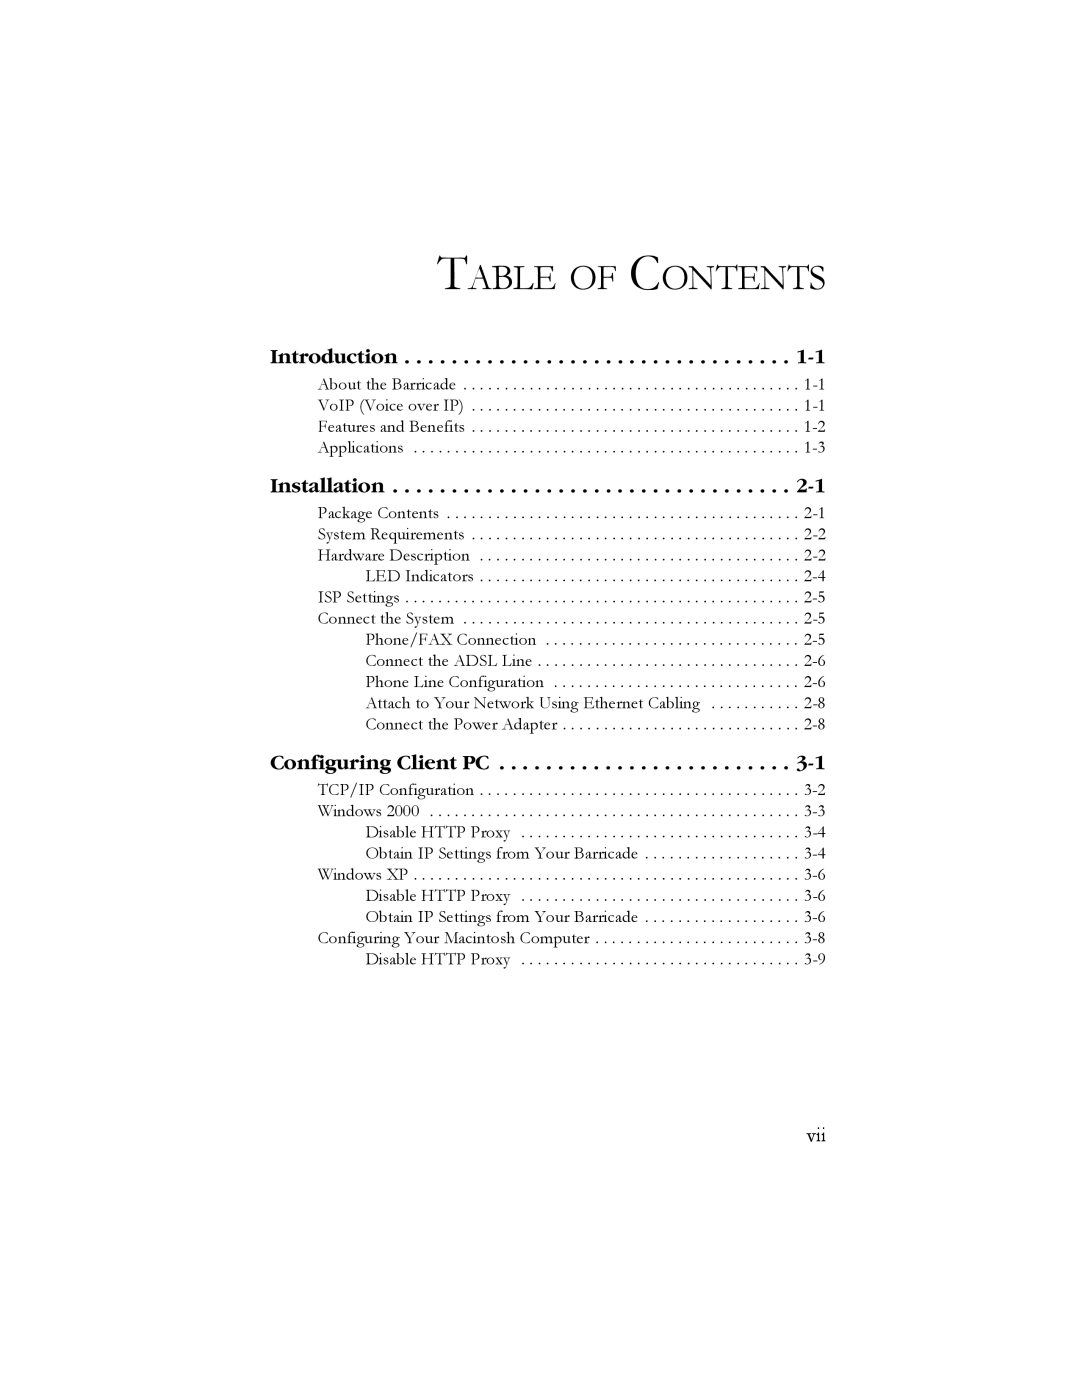 SMC Networks SMC7908VoWBRA manual Table Of Contents, Introduction, Installation, Configuring Client PC 